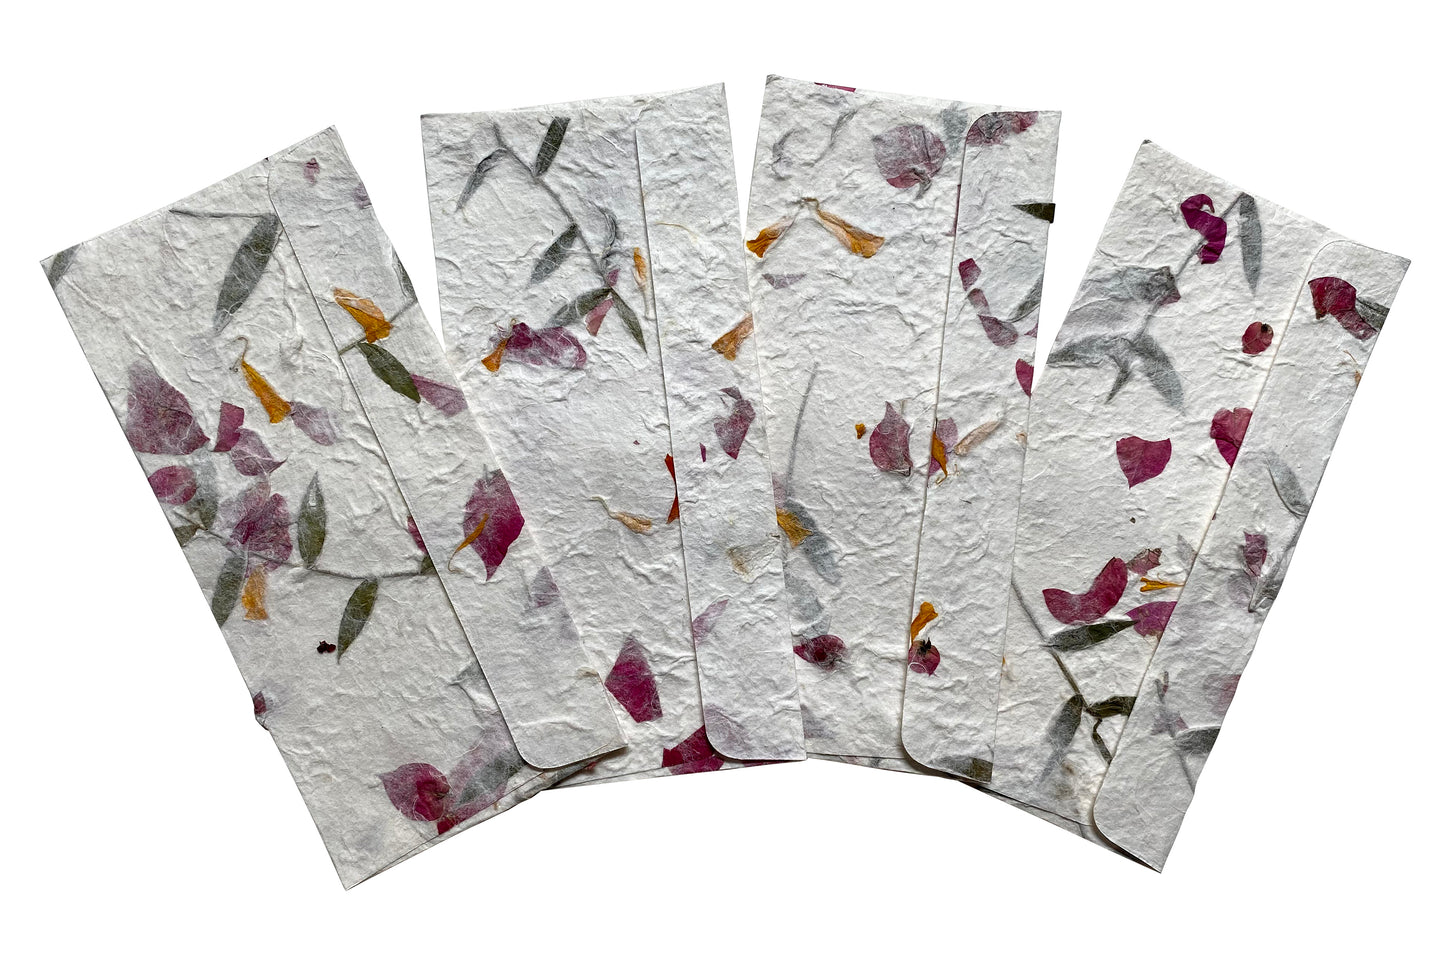 10 Envelope Per Pack Mulberry Paper Pressed Flower Inclusion Paper Handmade Envelope 10 x 21.5 CM - SIZE 3.94 x 8.46 INCH